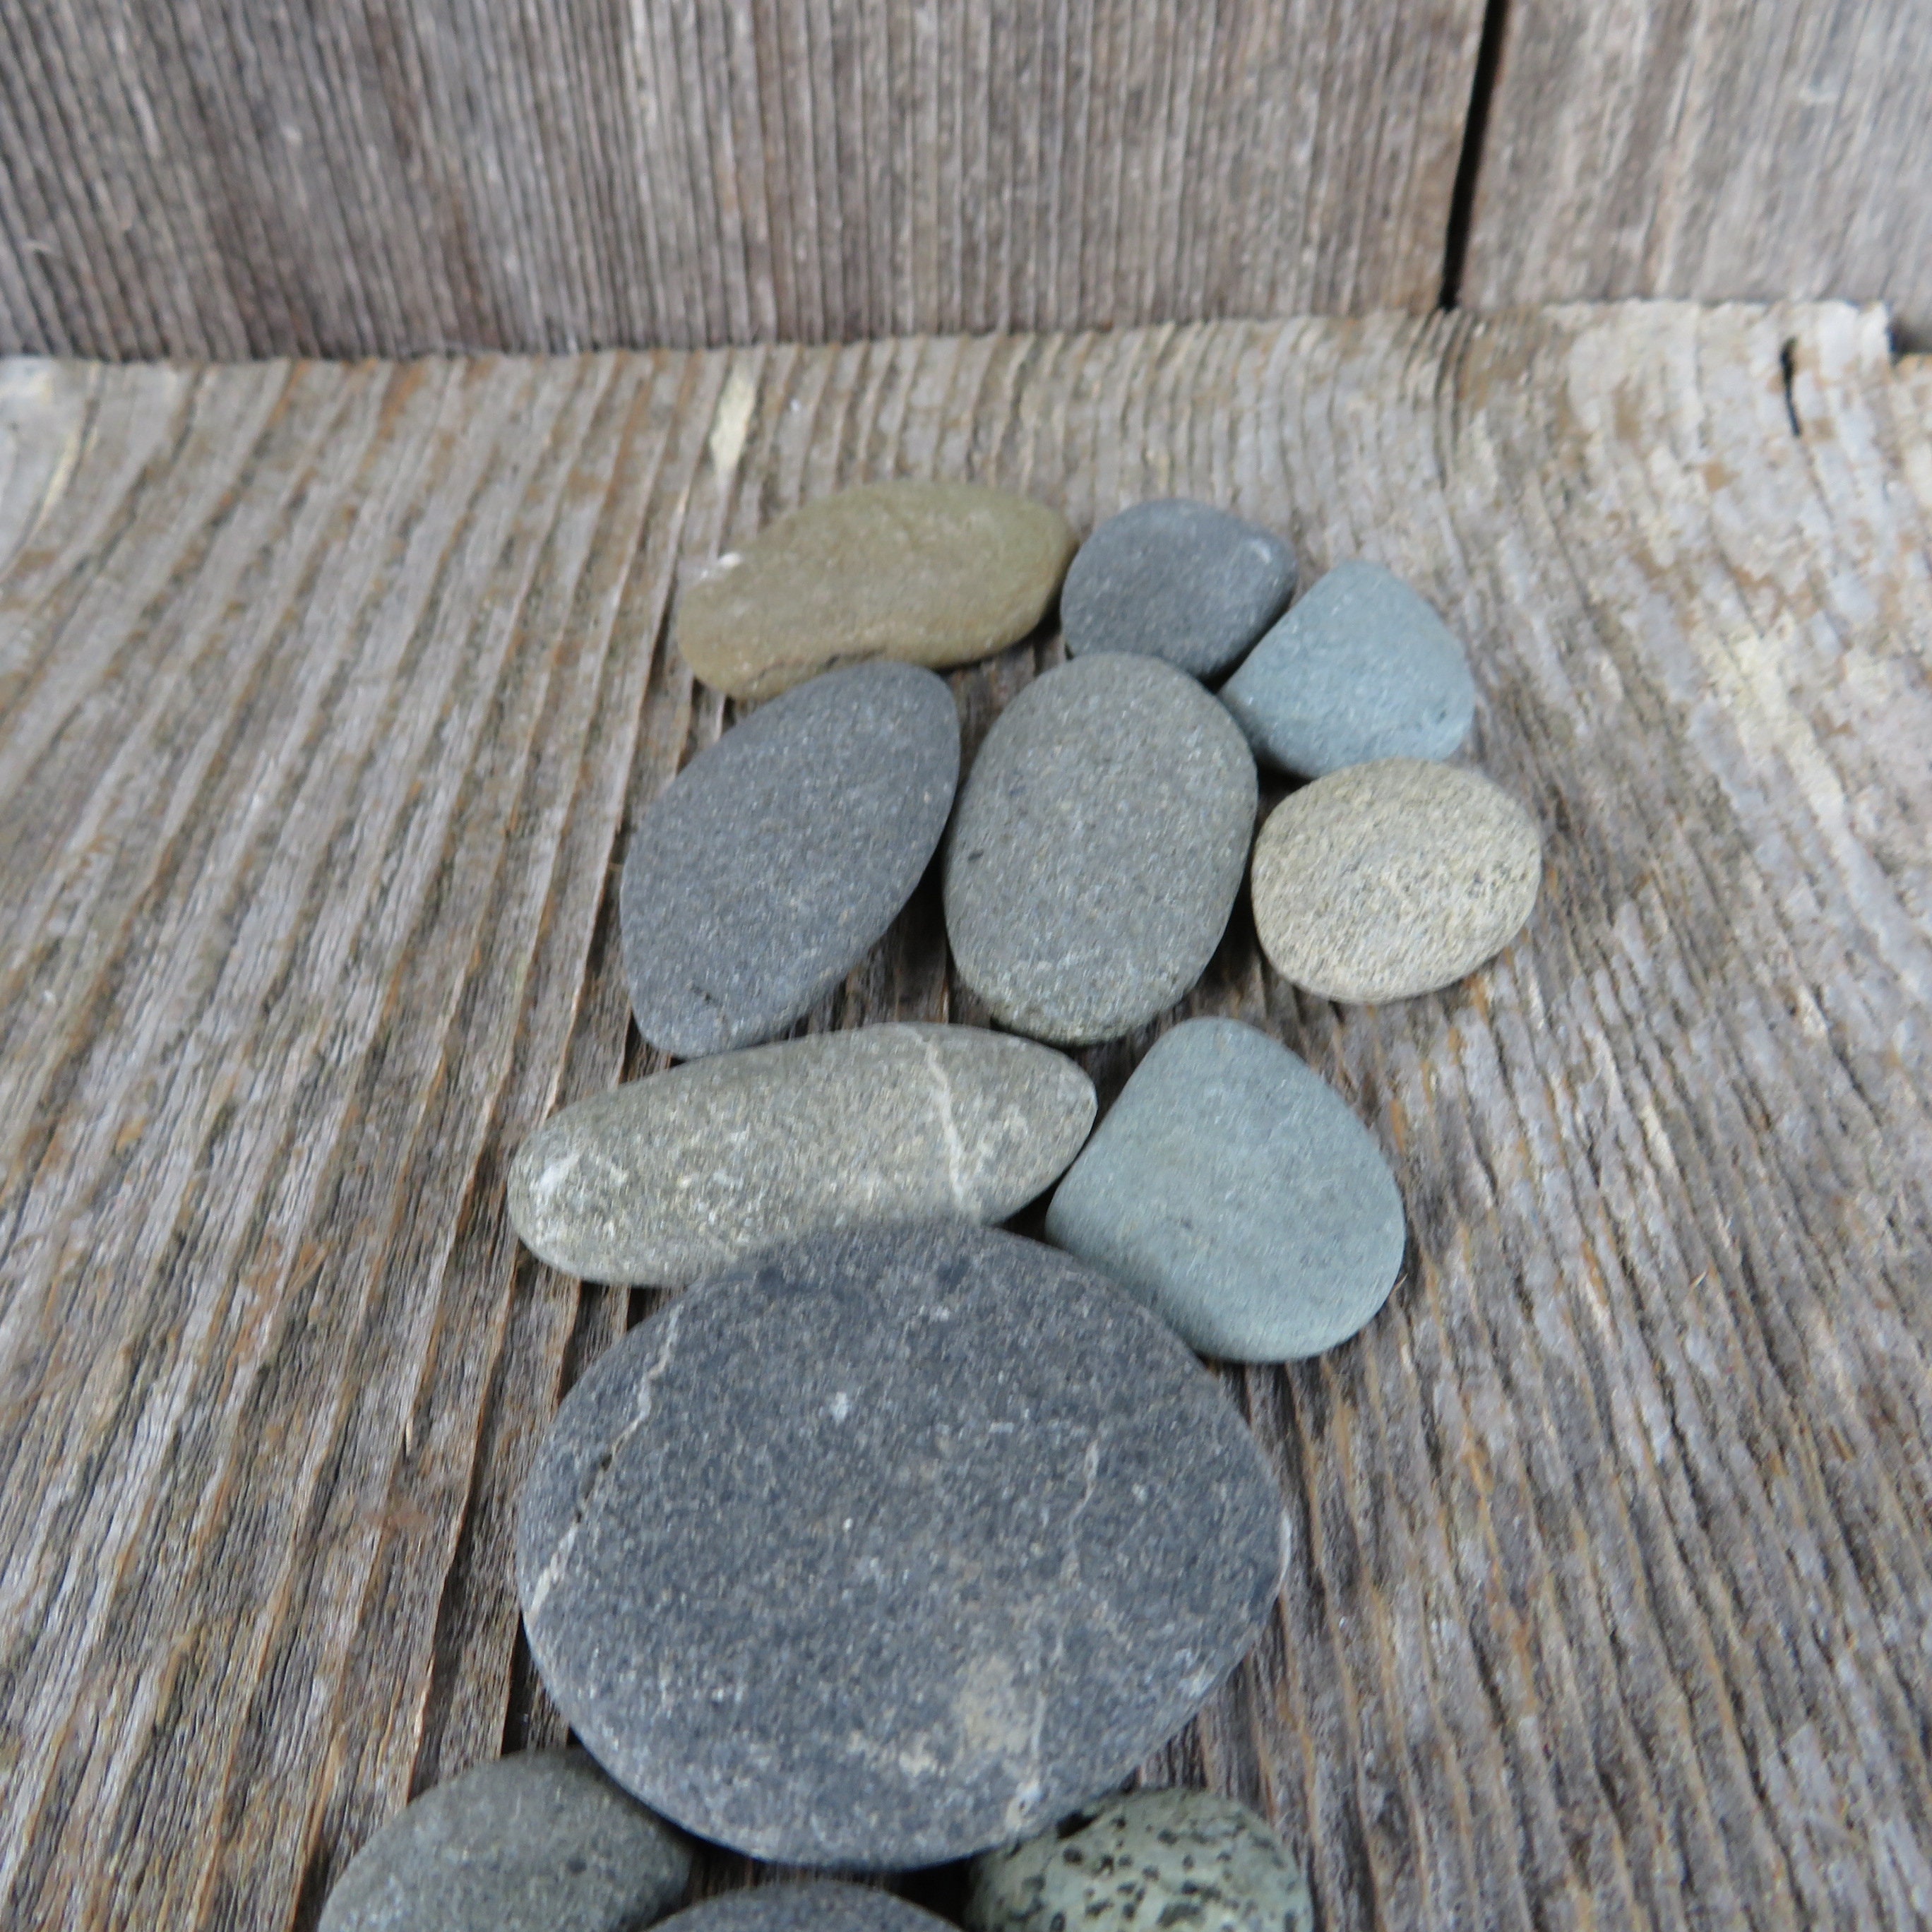 Garden Rock Path Stone Wall Ground Cover River Flat Stacking Rocks Cra – At  Grandma's Table